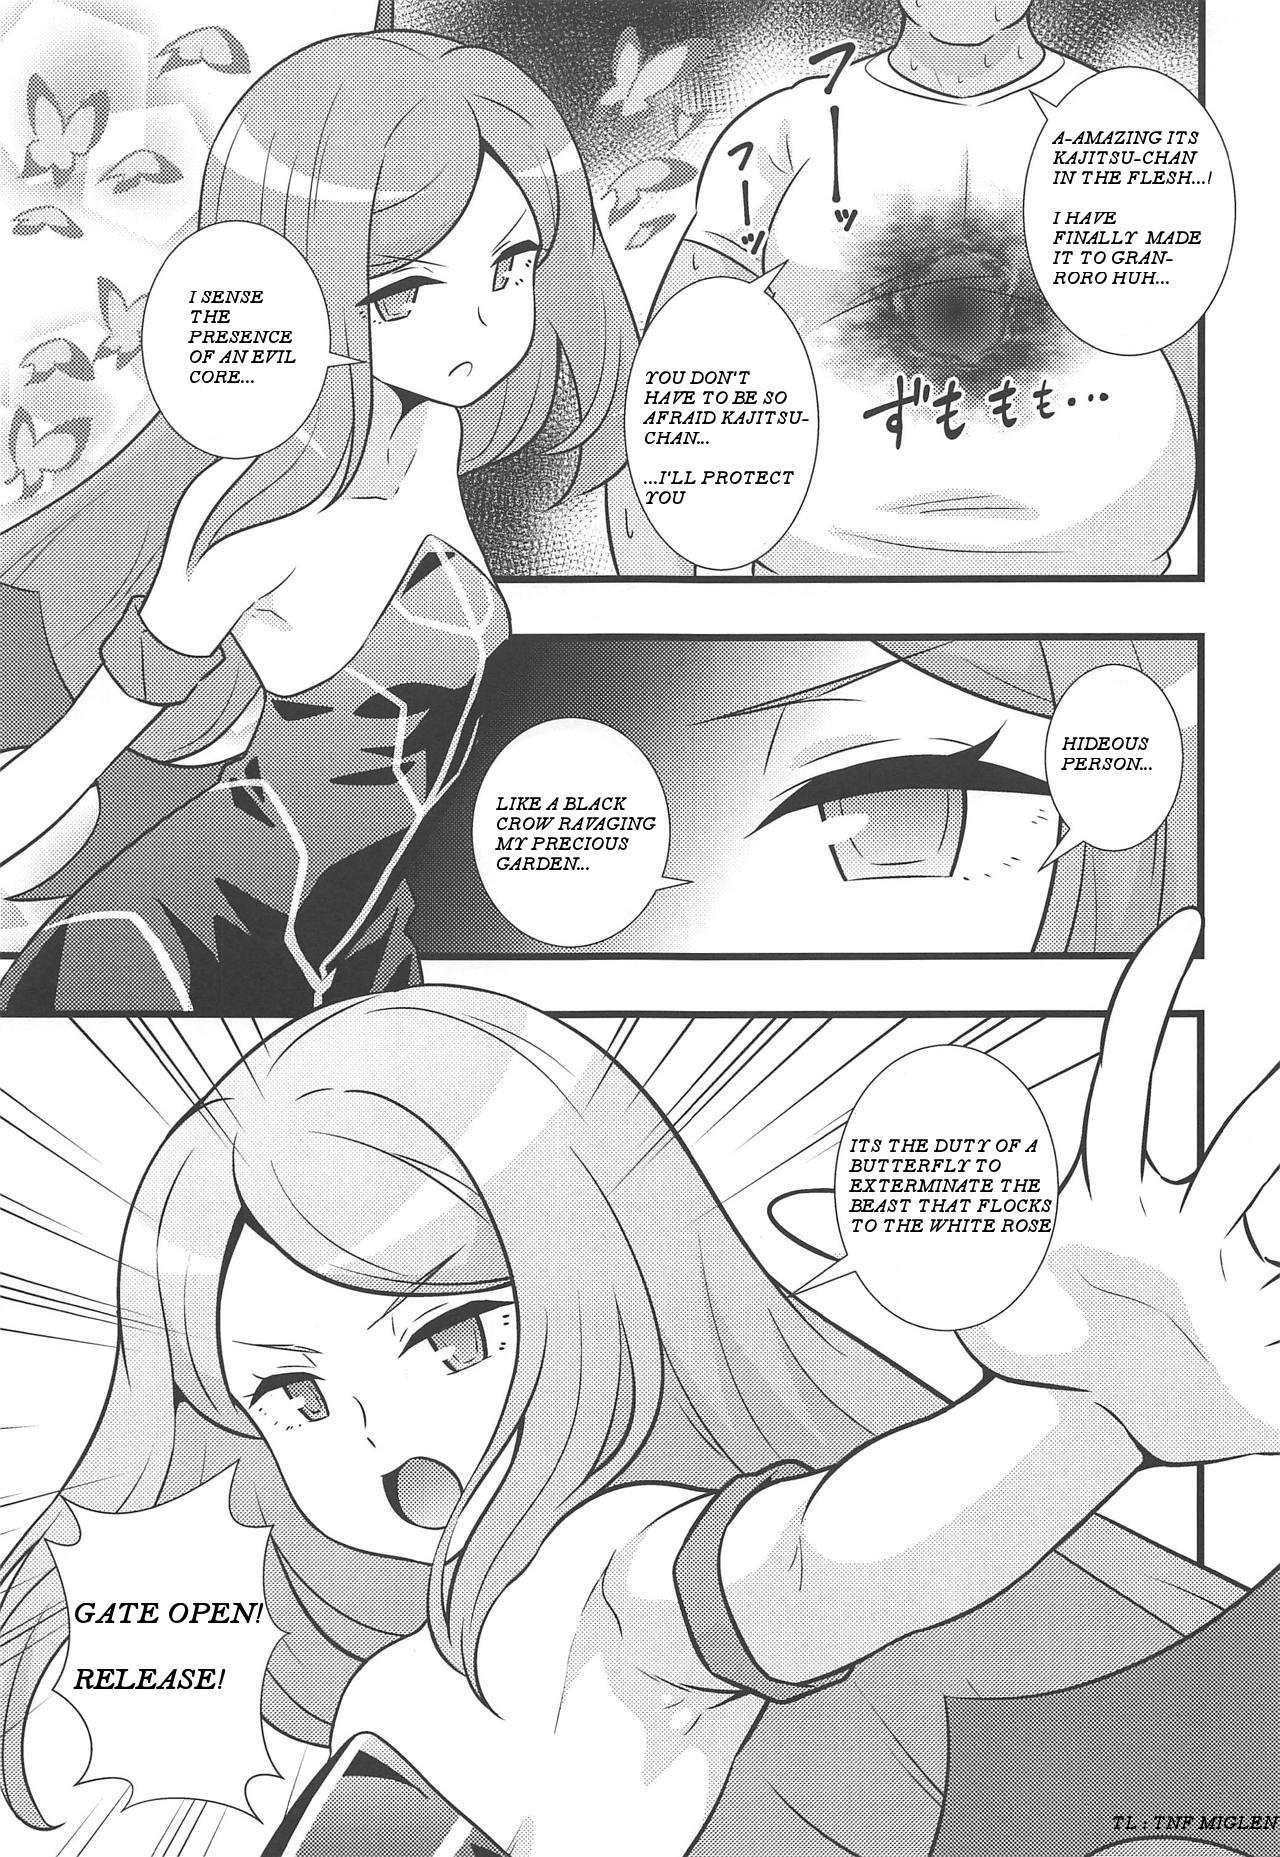 Sologirl Shouten! Harame Ore no Ragna-Rock!! - Battle spirits Pounded - Page 2